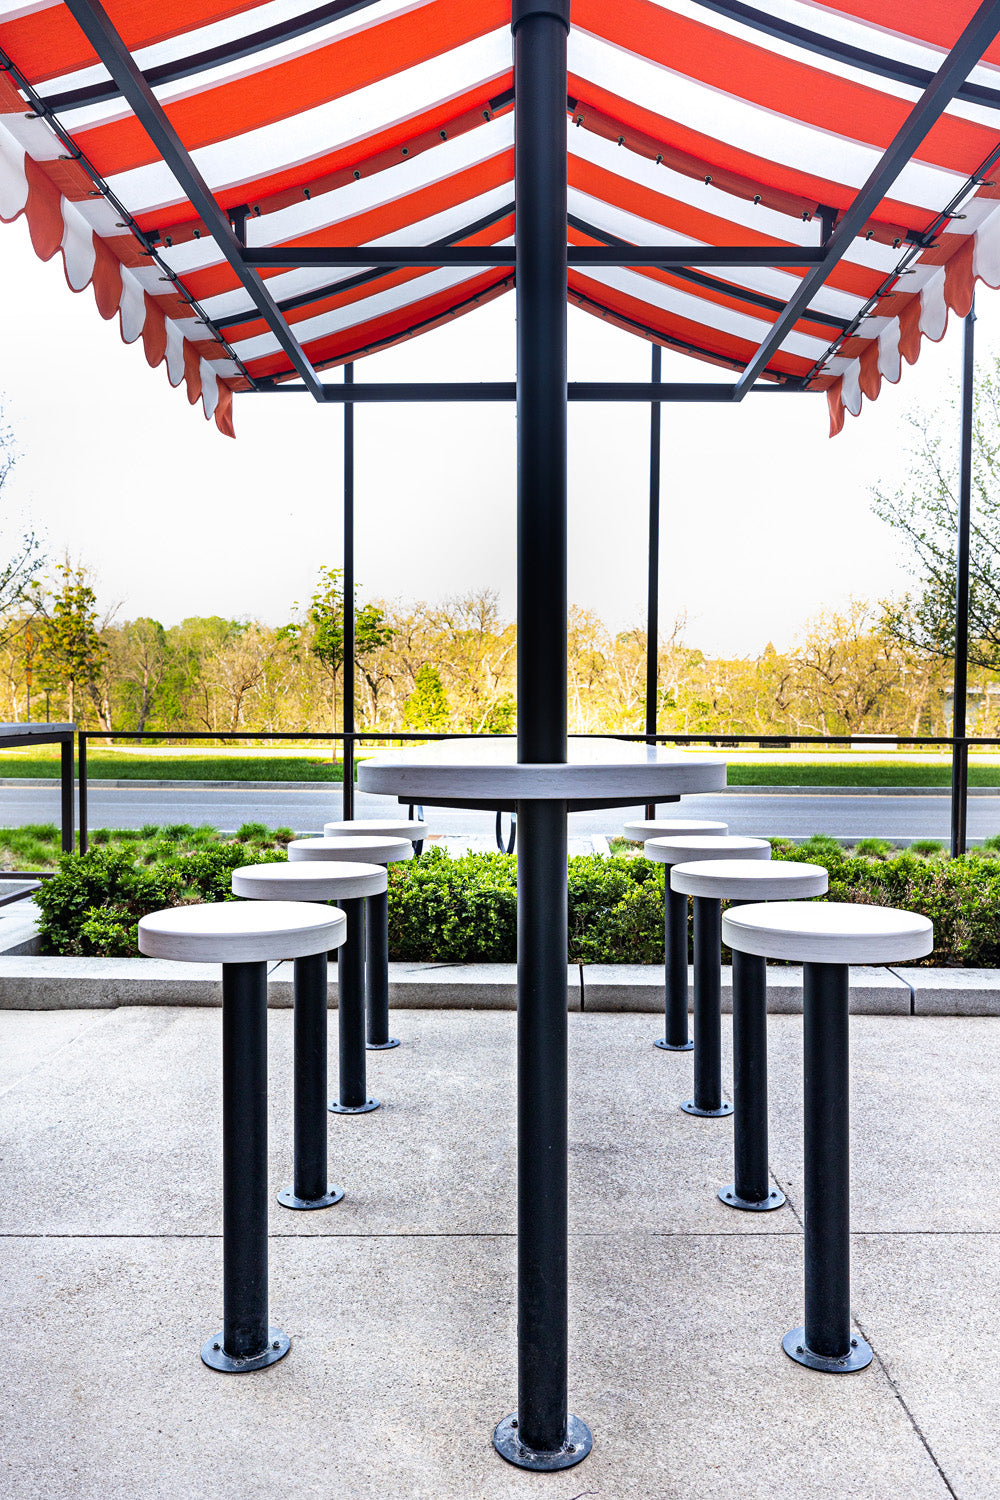 Outdoor seating and tables by Edgework Creative